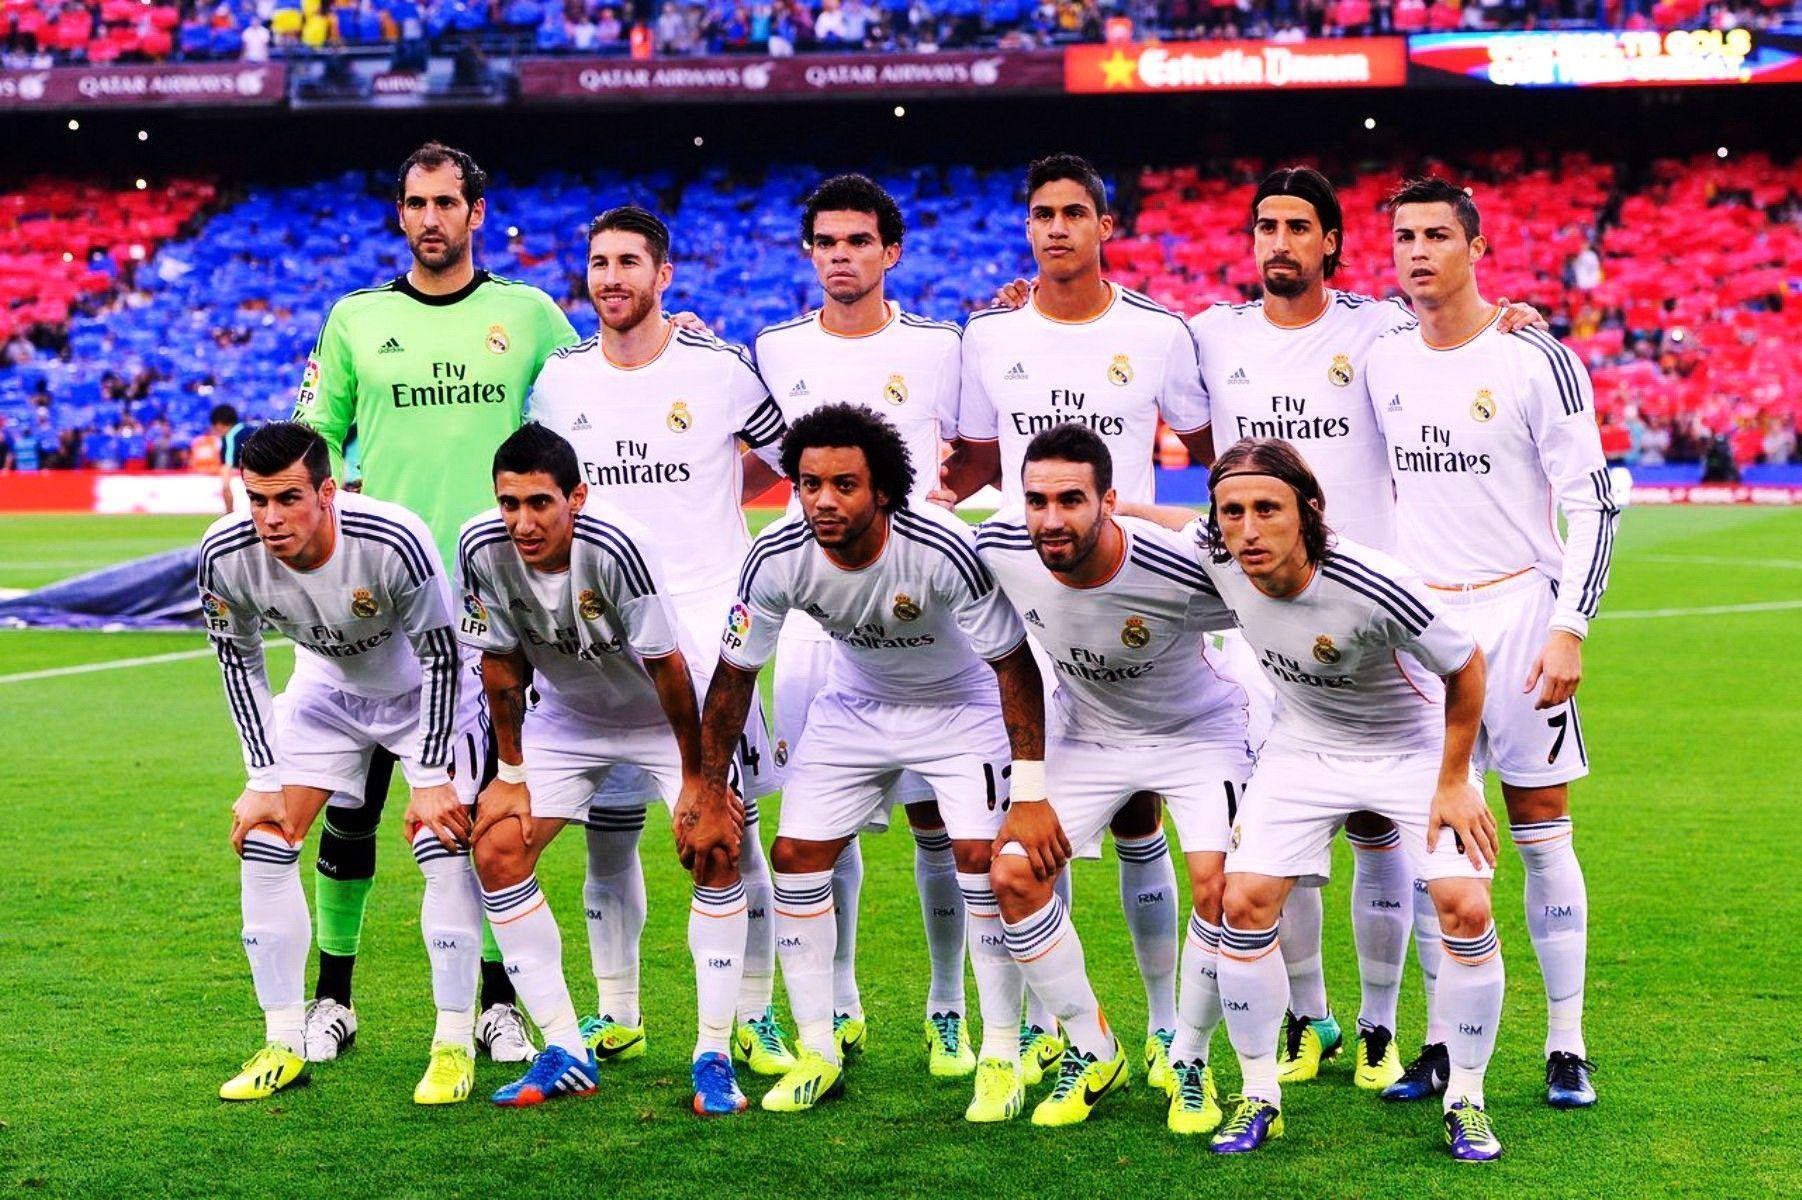 Adorable Real Madrid 2016 Picture, Real Madrid 2016 Wallpaper